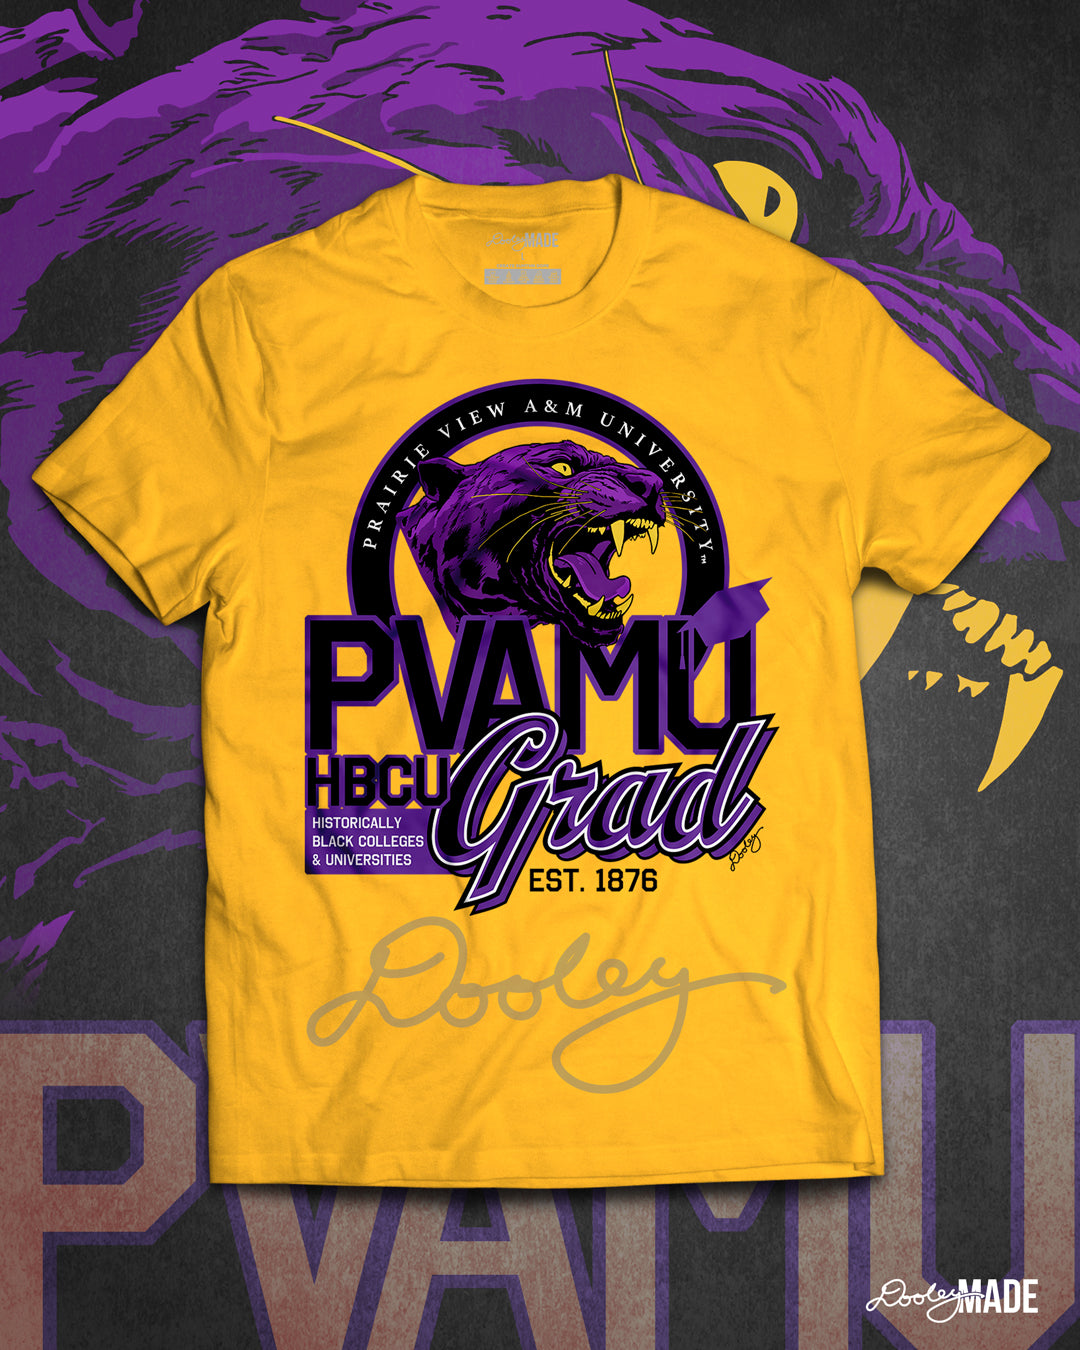 A gold Prairie View A&M graduation shirt featuring a roaring panther surrounded by a circular frame with the university name inside of it, and the words "PVAMU Grad" next to HBCU. 